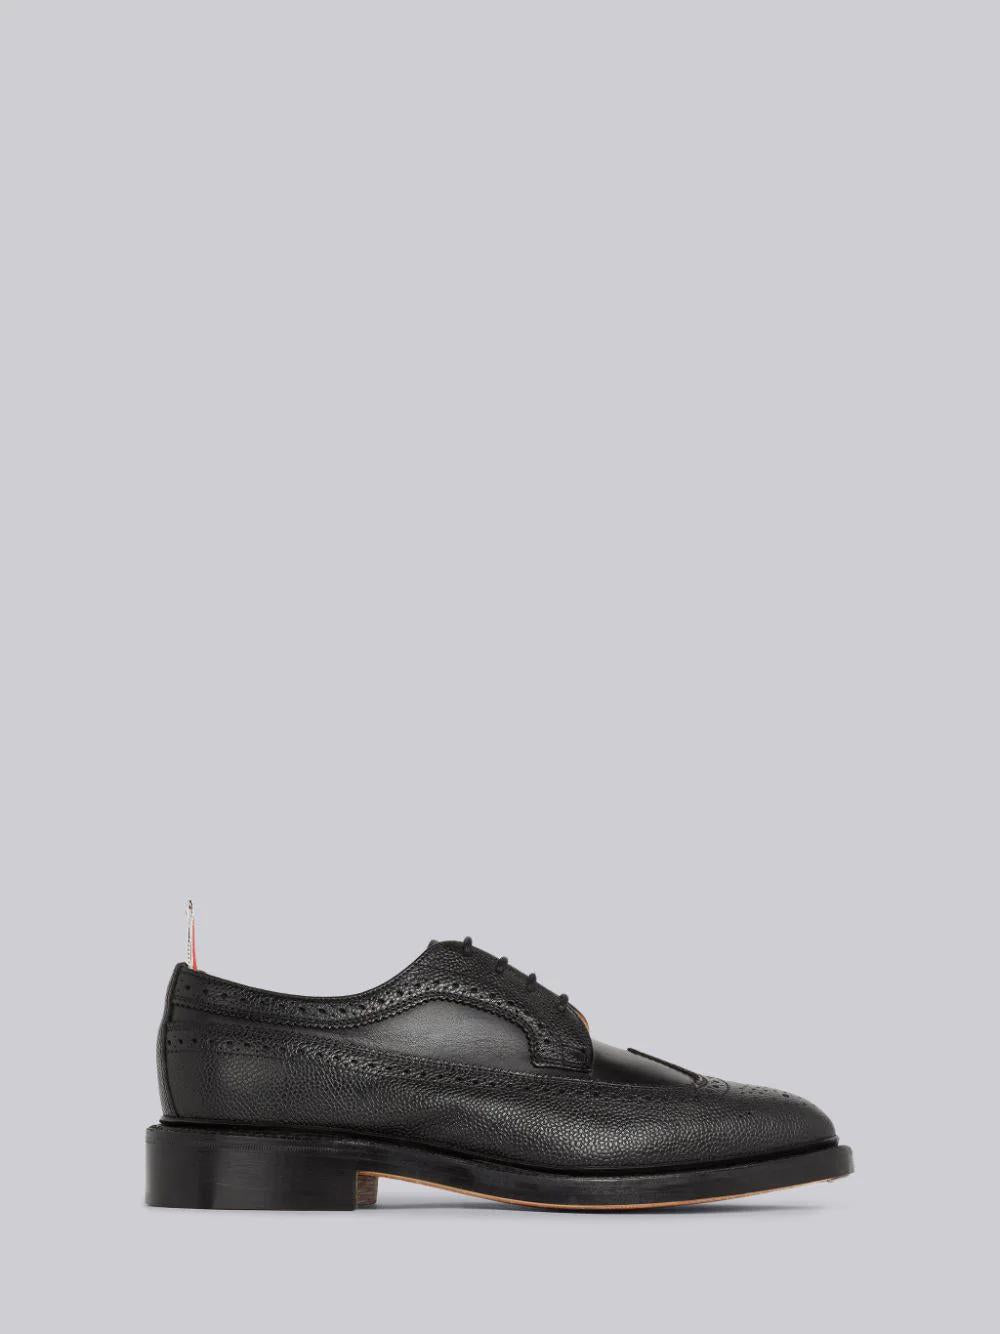 THOM BROWNE LOAFERS (01)